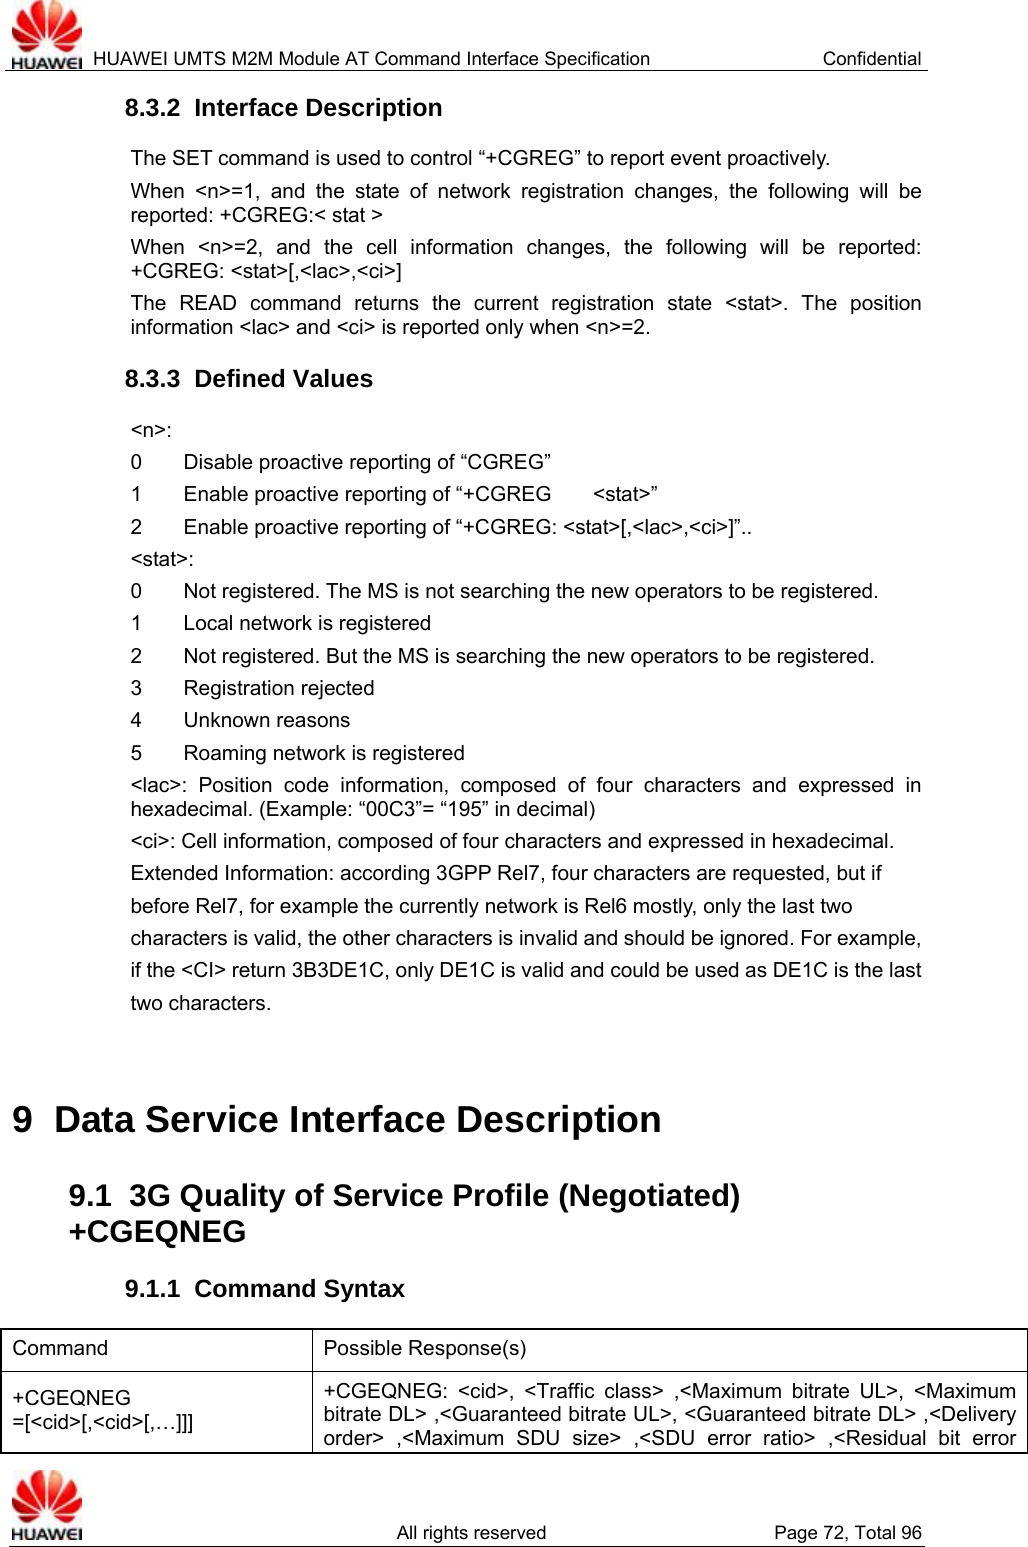  HUAWEI UMTS M2M Module AT Command Interface Specification  Confidential   All rights reserved  Page 72, Total 96 8.3.2  Interface Description The SET command is used to control “+CGREG” to report event proactively.   When &lt;n&gt;=1, and the state of network registration changes, the following will be reported: +CGREG:&lt; stat &gt; When &lt;n&gt;=2, and the cell information changes, the following will be reported: +CGREG: &lt;stat&gt;[,&lt;lac&gt;,&lt;ci&gt;] The READ command returns the current registration state &lt;stat&gt;. The position information &lt;lac&gt; and &lt;ci&gt; is reported only when &lt;n&gt;=2.   8.3.3  Defined Values &lt;n&gt;: 0    Disable proactive reporting of “CGREG” 1    Enable proactive reporting of “+CGREG    &lt;stat&gt;” 2        Enable proactive reporting of “+CGREG: &lt;stat&gt;[,&lt;lac&gt;,&lt;ci&gt;]”..   &lt;stat&gt;: 0        Not registered. The MS is not searching the new operators to be registered.   1    Local network is registered 2        Not registered. But the MS is searching the new operators to be registered.   3    Registration rejected 4    Unknown reasons 5    Roaming network is registered &lt;lac&gt;: Position code information, composed of four characters and expressed in hexadecimal. (Example: “00C3”= “195” in decimal) &lt;ci&gt;: Cell information, composed of four characters and expressed in hexadecimal. Extended Information: according 3GPP Rel7, four characters are requested, but if before Rel7, for example the currently network is Rel6 mostly, only the last two characters is valid, the other characters is invalid and should be ignored. For example, if the &lt;CI&gt; return 3B3DE1C, only DE1C is valid and could be used as DE1C is the last two characters.  9  Data Service Interface Description 9.1  3G Quality of Service Profile (Negotiated) +CGEQNEG 9.1.1  Command Syntax Command Possible Response(s) +CGEQNEG =[&lt;cid&gt;[,&lt;cid&gt;[,…]]] +CGEQNEG: &lt;cid&gt;, &lt;Traffic class&gt; ,&lt;Maximum bitrate UL&gt;, &lt;Maximum bitrate DL&gt; ,&lt;Guaranteed bitrate UL&gt;, &lt;Guaranteed bitrate DL&gt; ,&lt;Delivery order&gt; ,&lt;Maximum SDU size&gt; ,&lt;SDU error ratio&gt; ,&lt;Residual bit error 